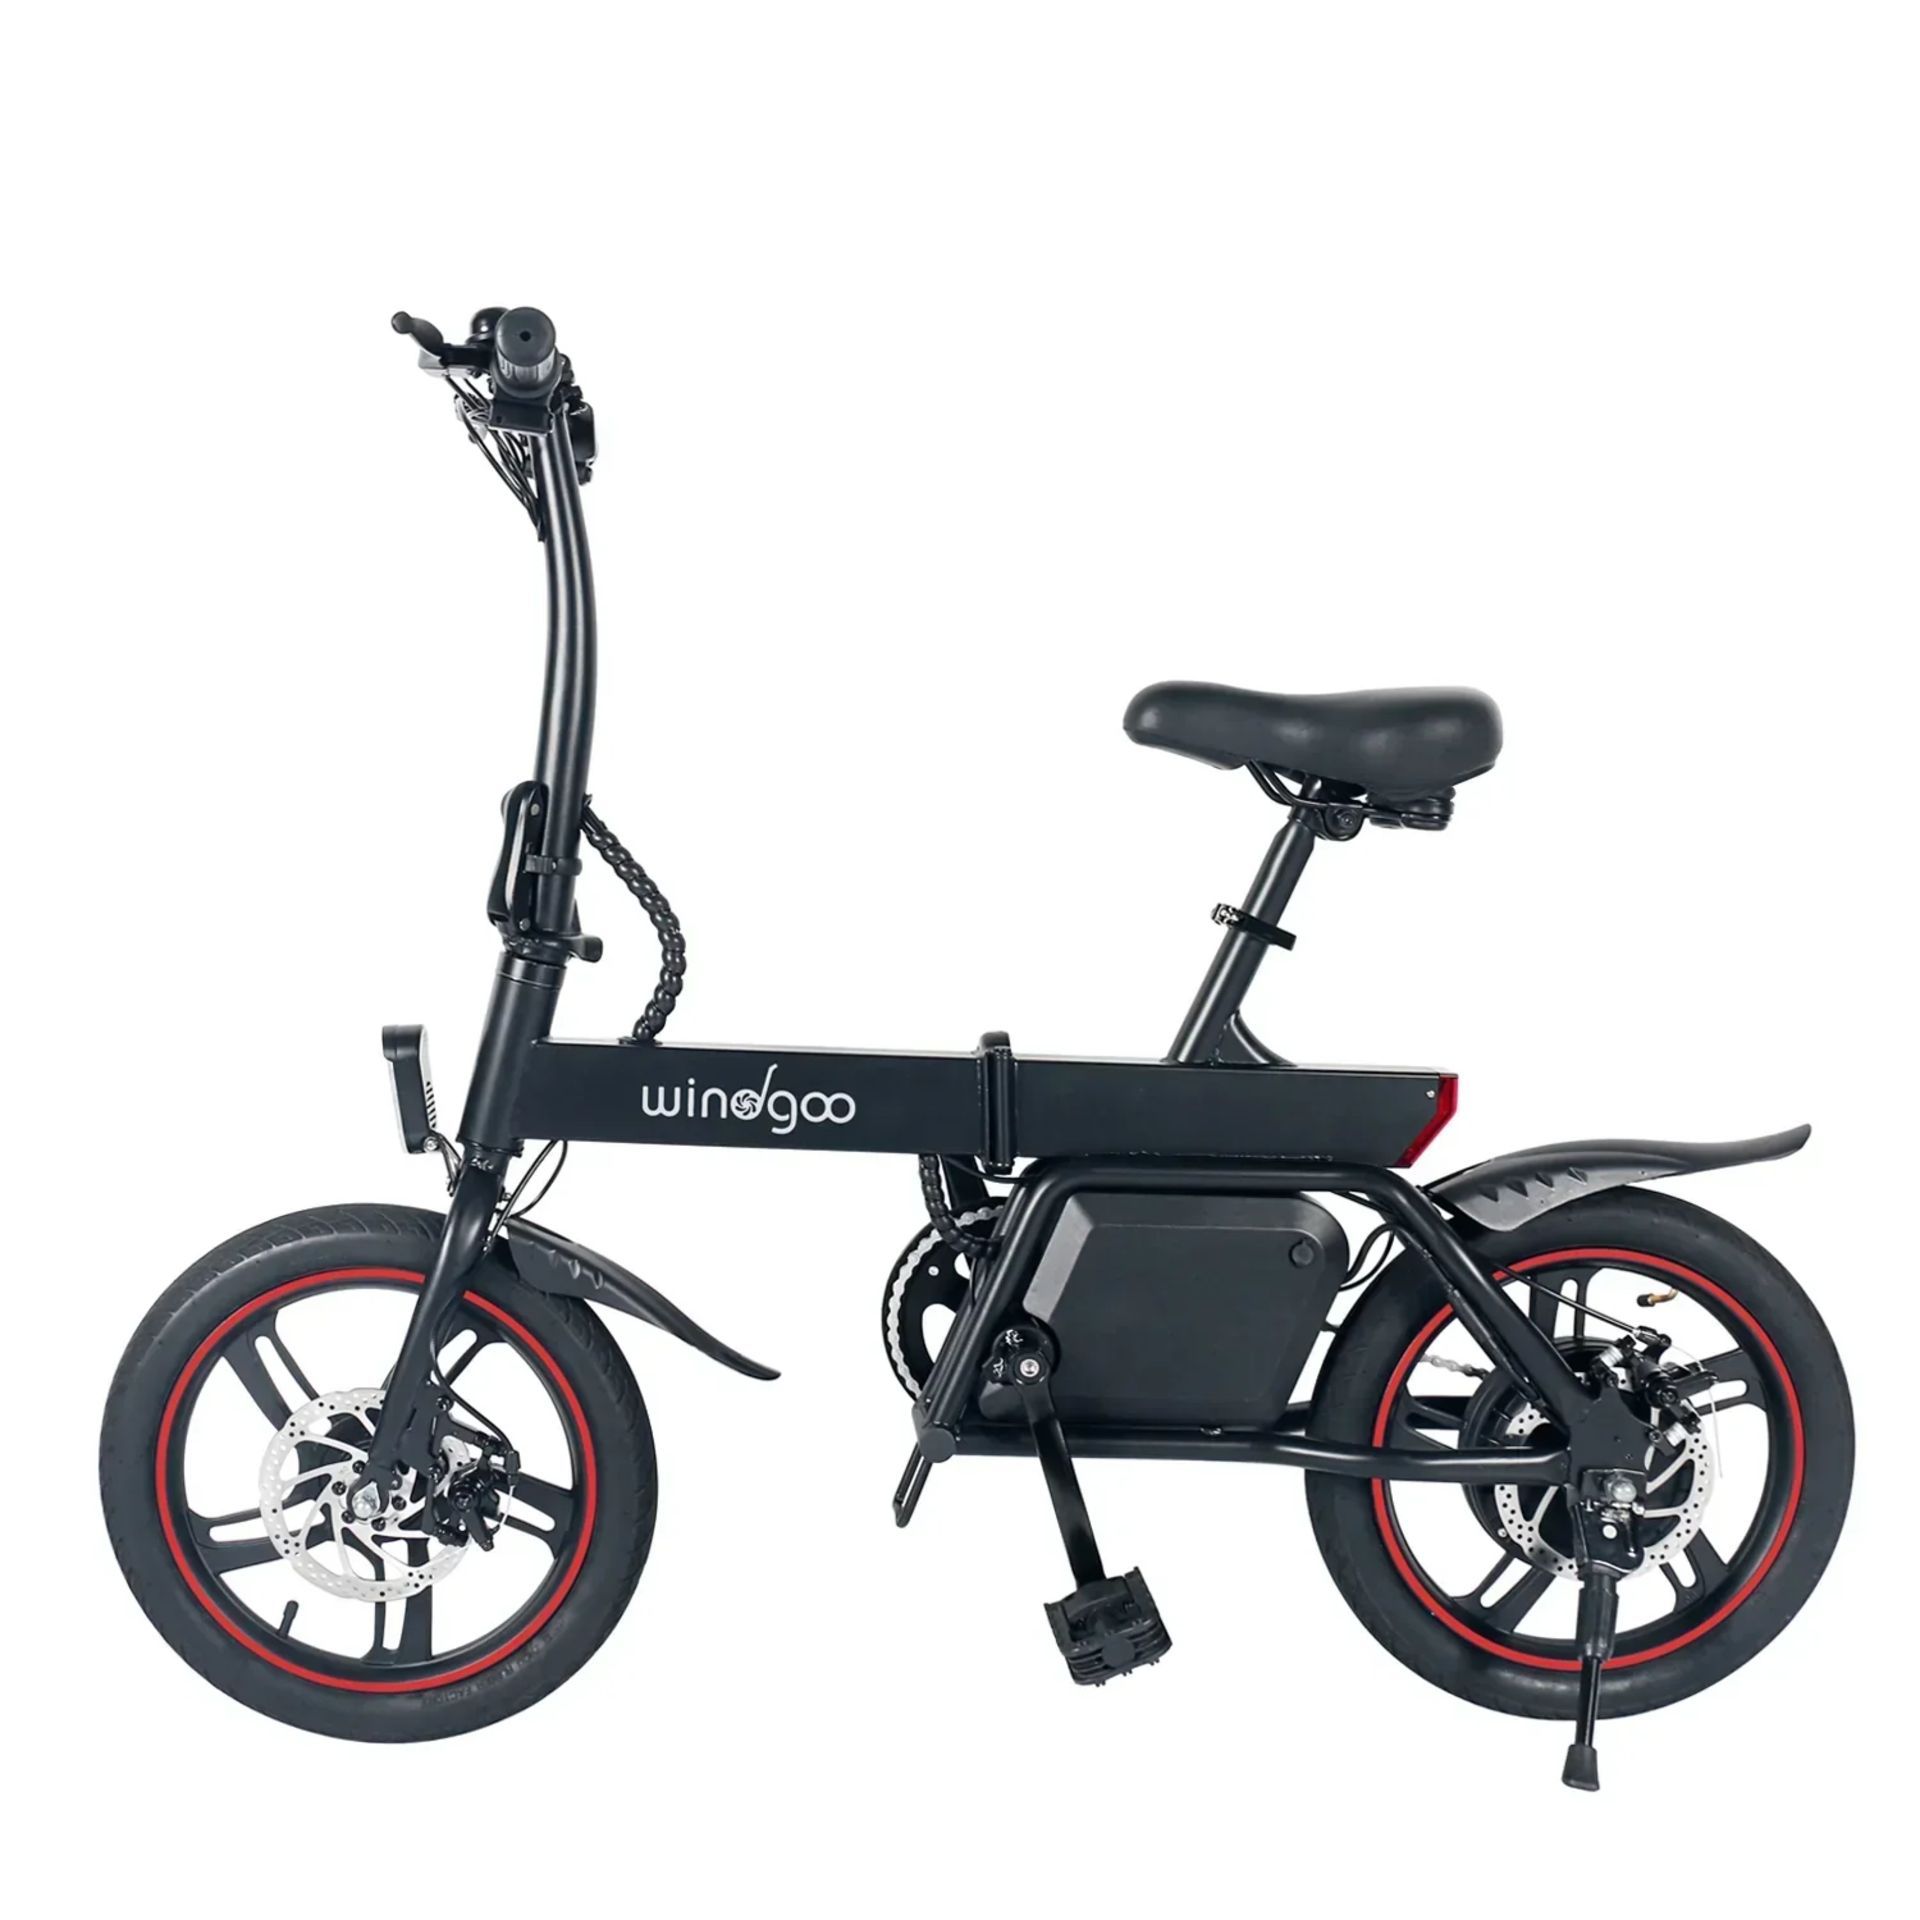 Windgoo B20 Pro Electric Bike. RRP £1,100.99. With 16-inch-wide tires and a frame of upgraded - Bild 7 aus 7